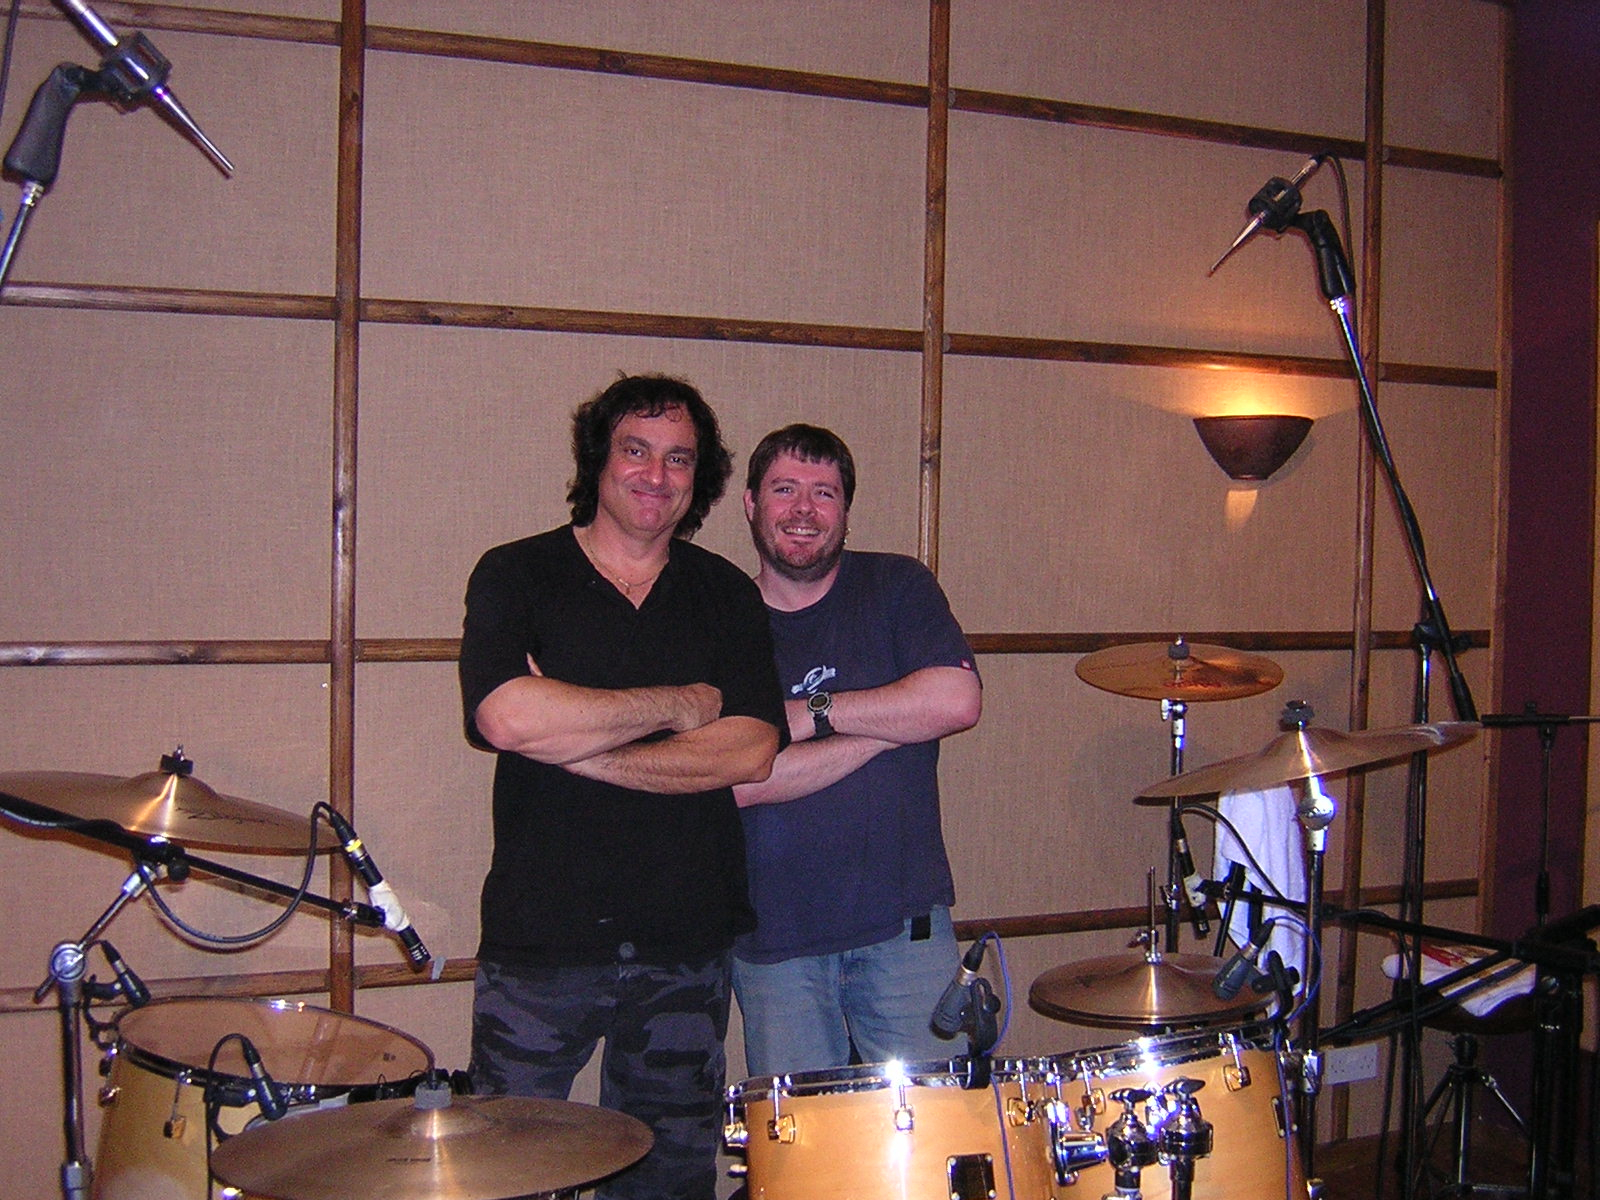 Tracking Drums - "The Dio Years" Dec 2006